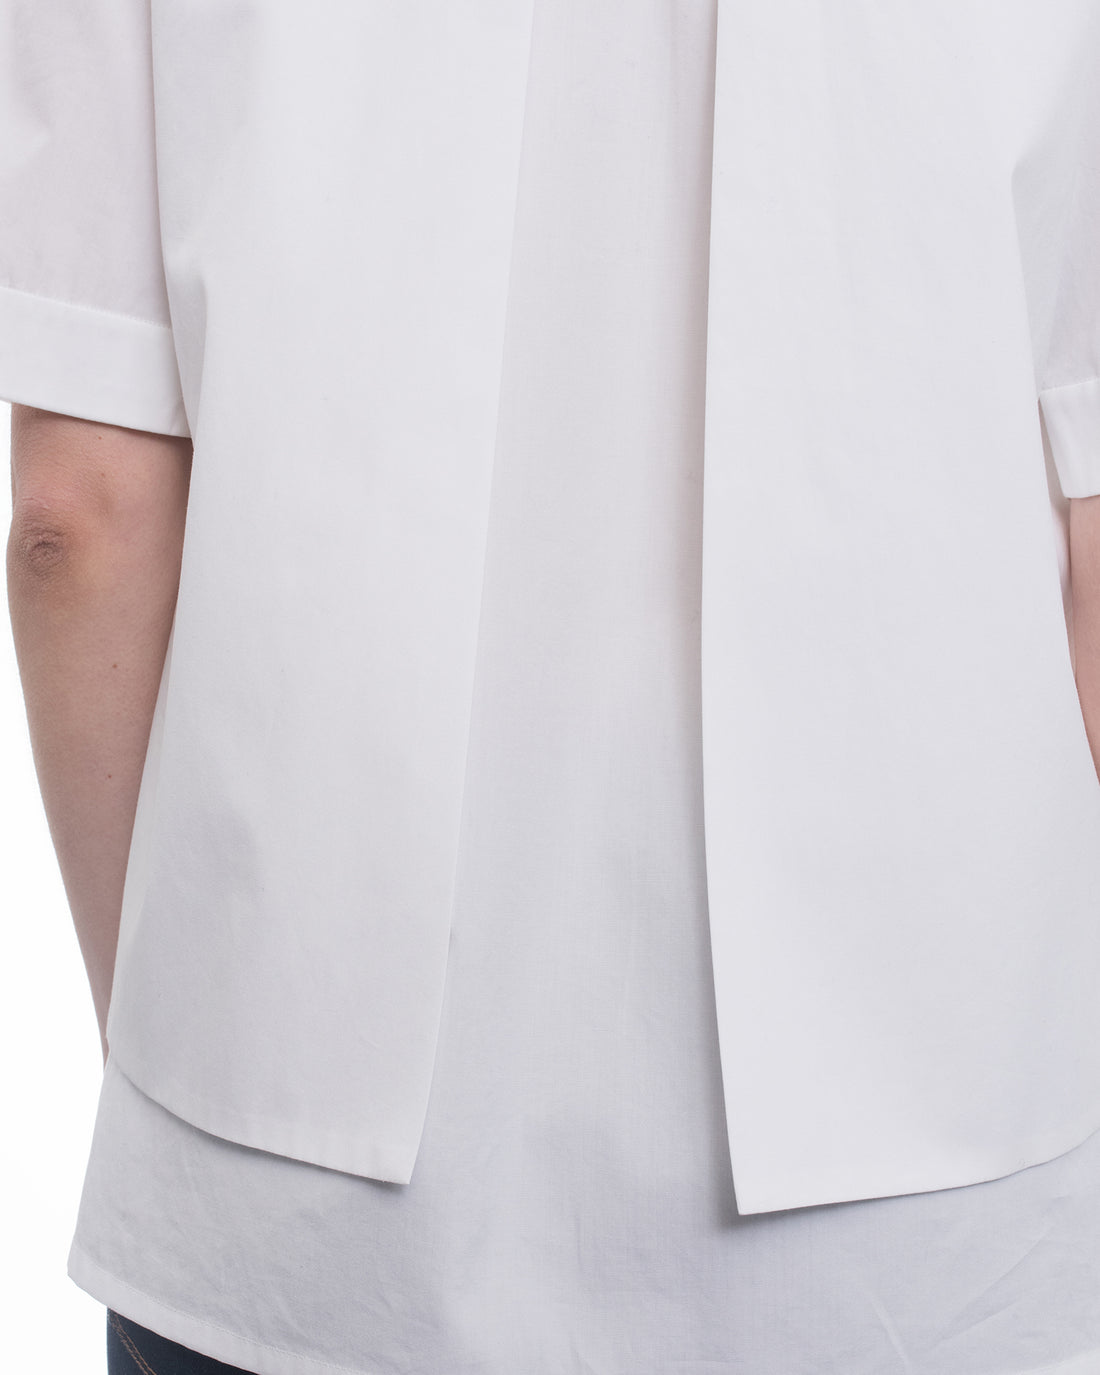 Peter Pilotto Radial White Cotton Panelled Shirt with Lace Inset - 8